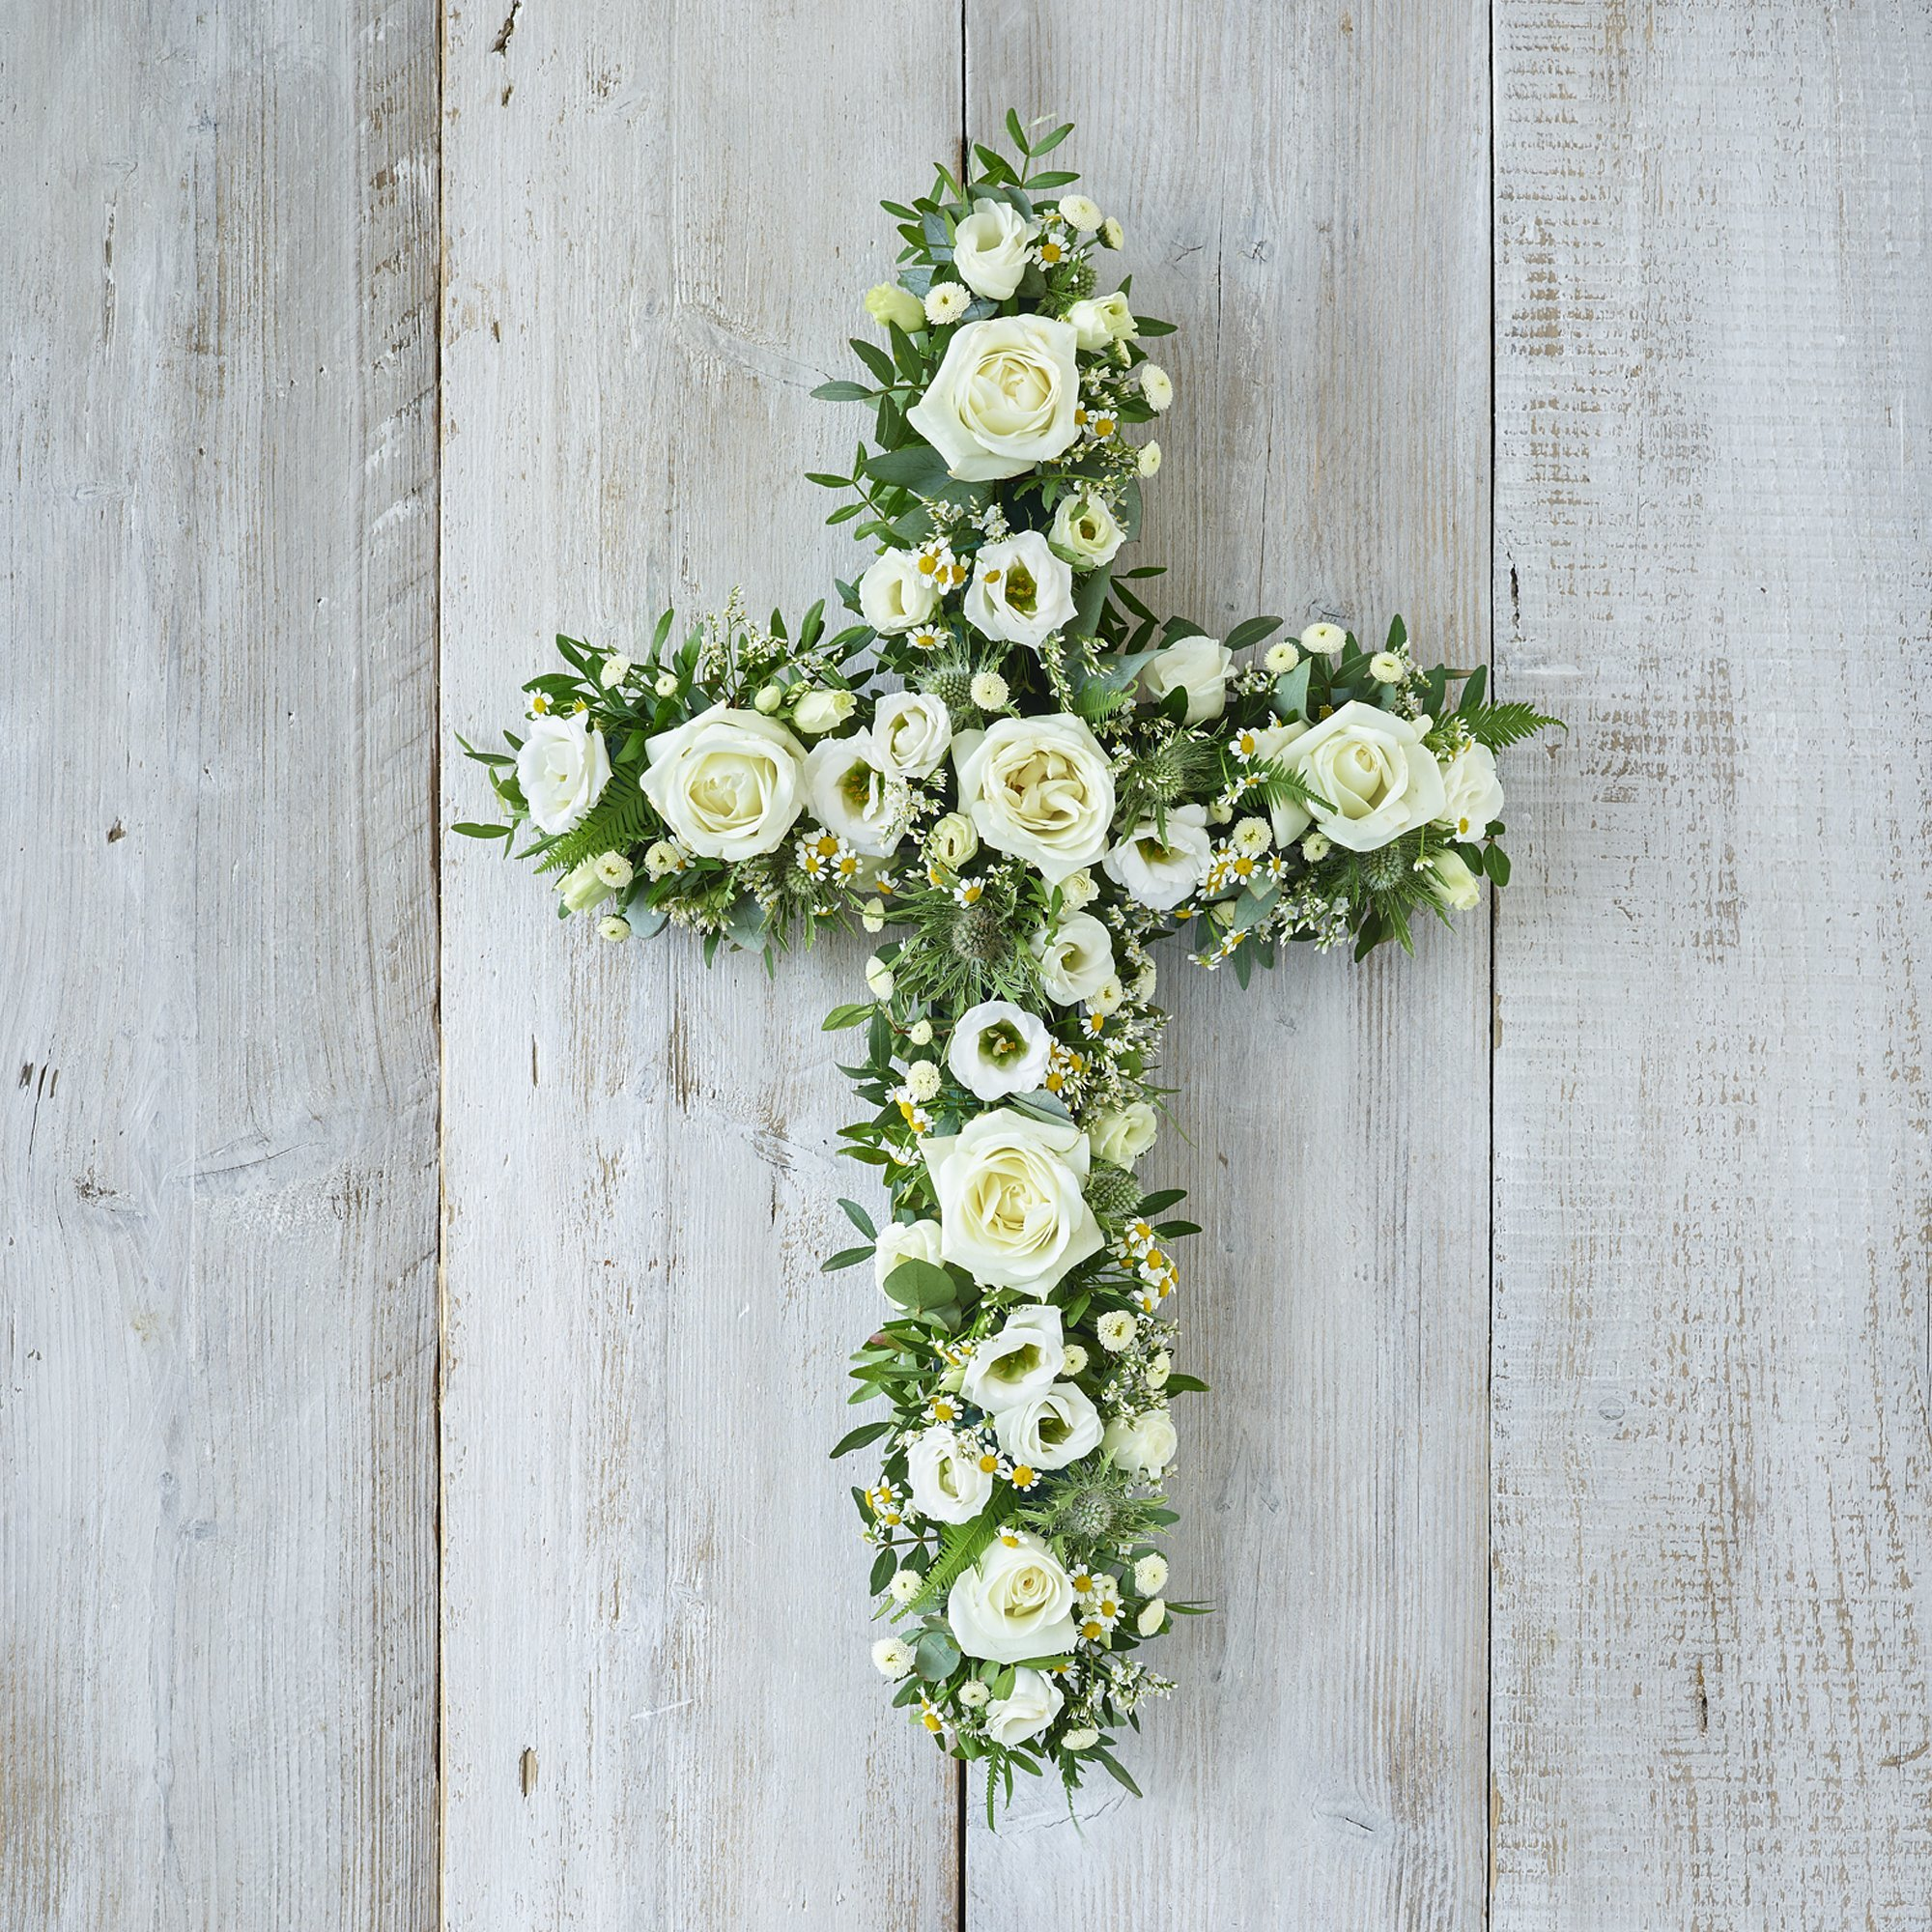 White and Green Cross image